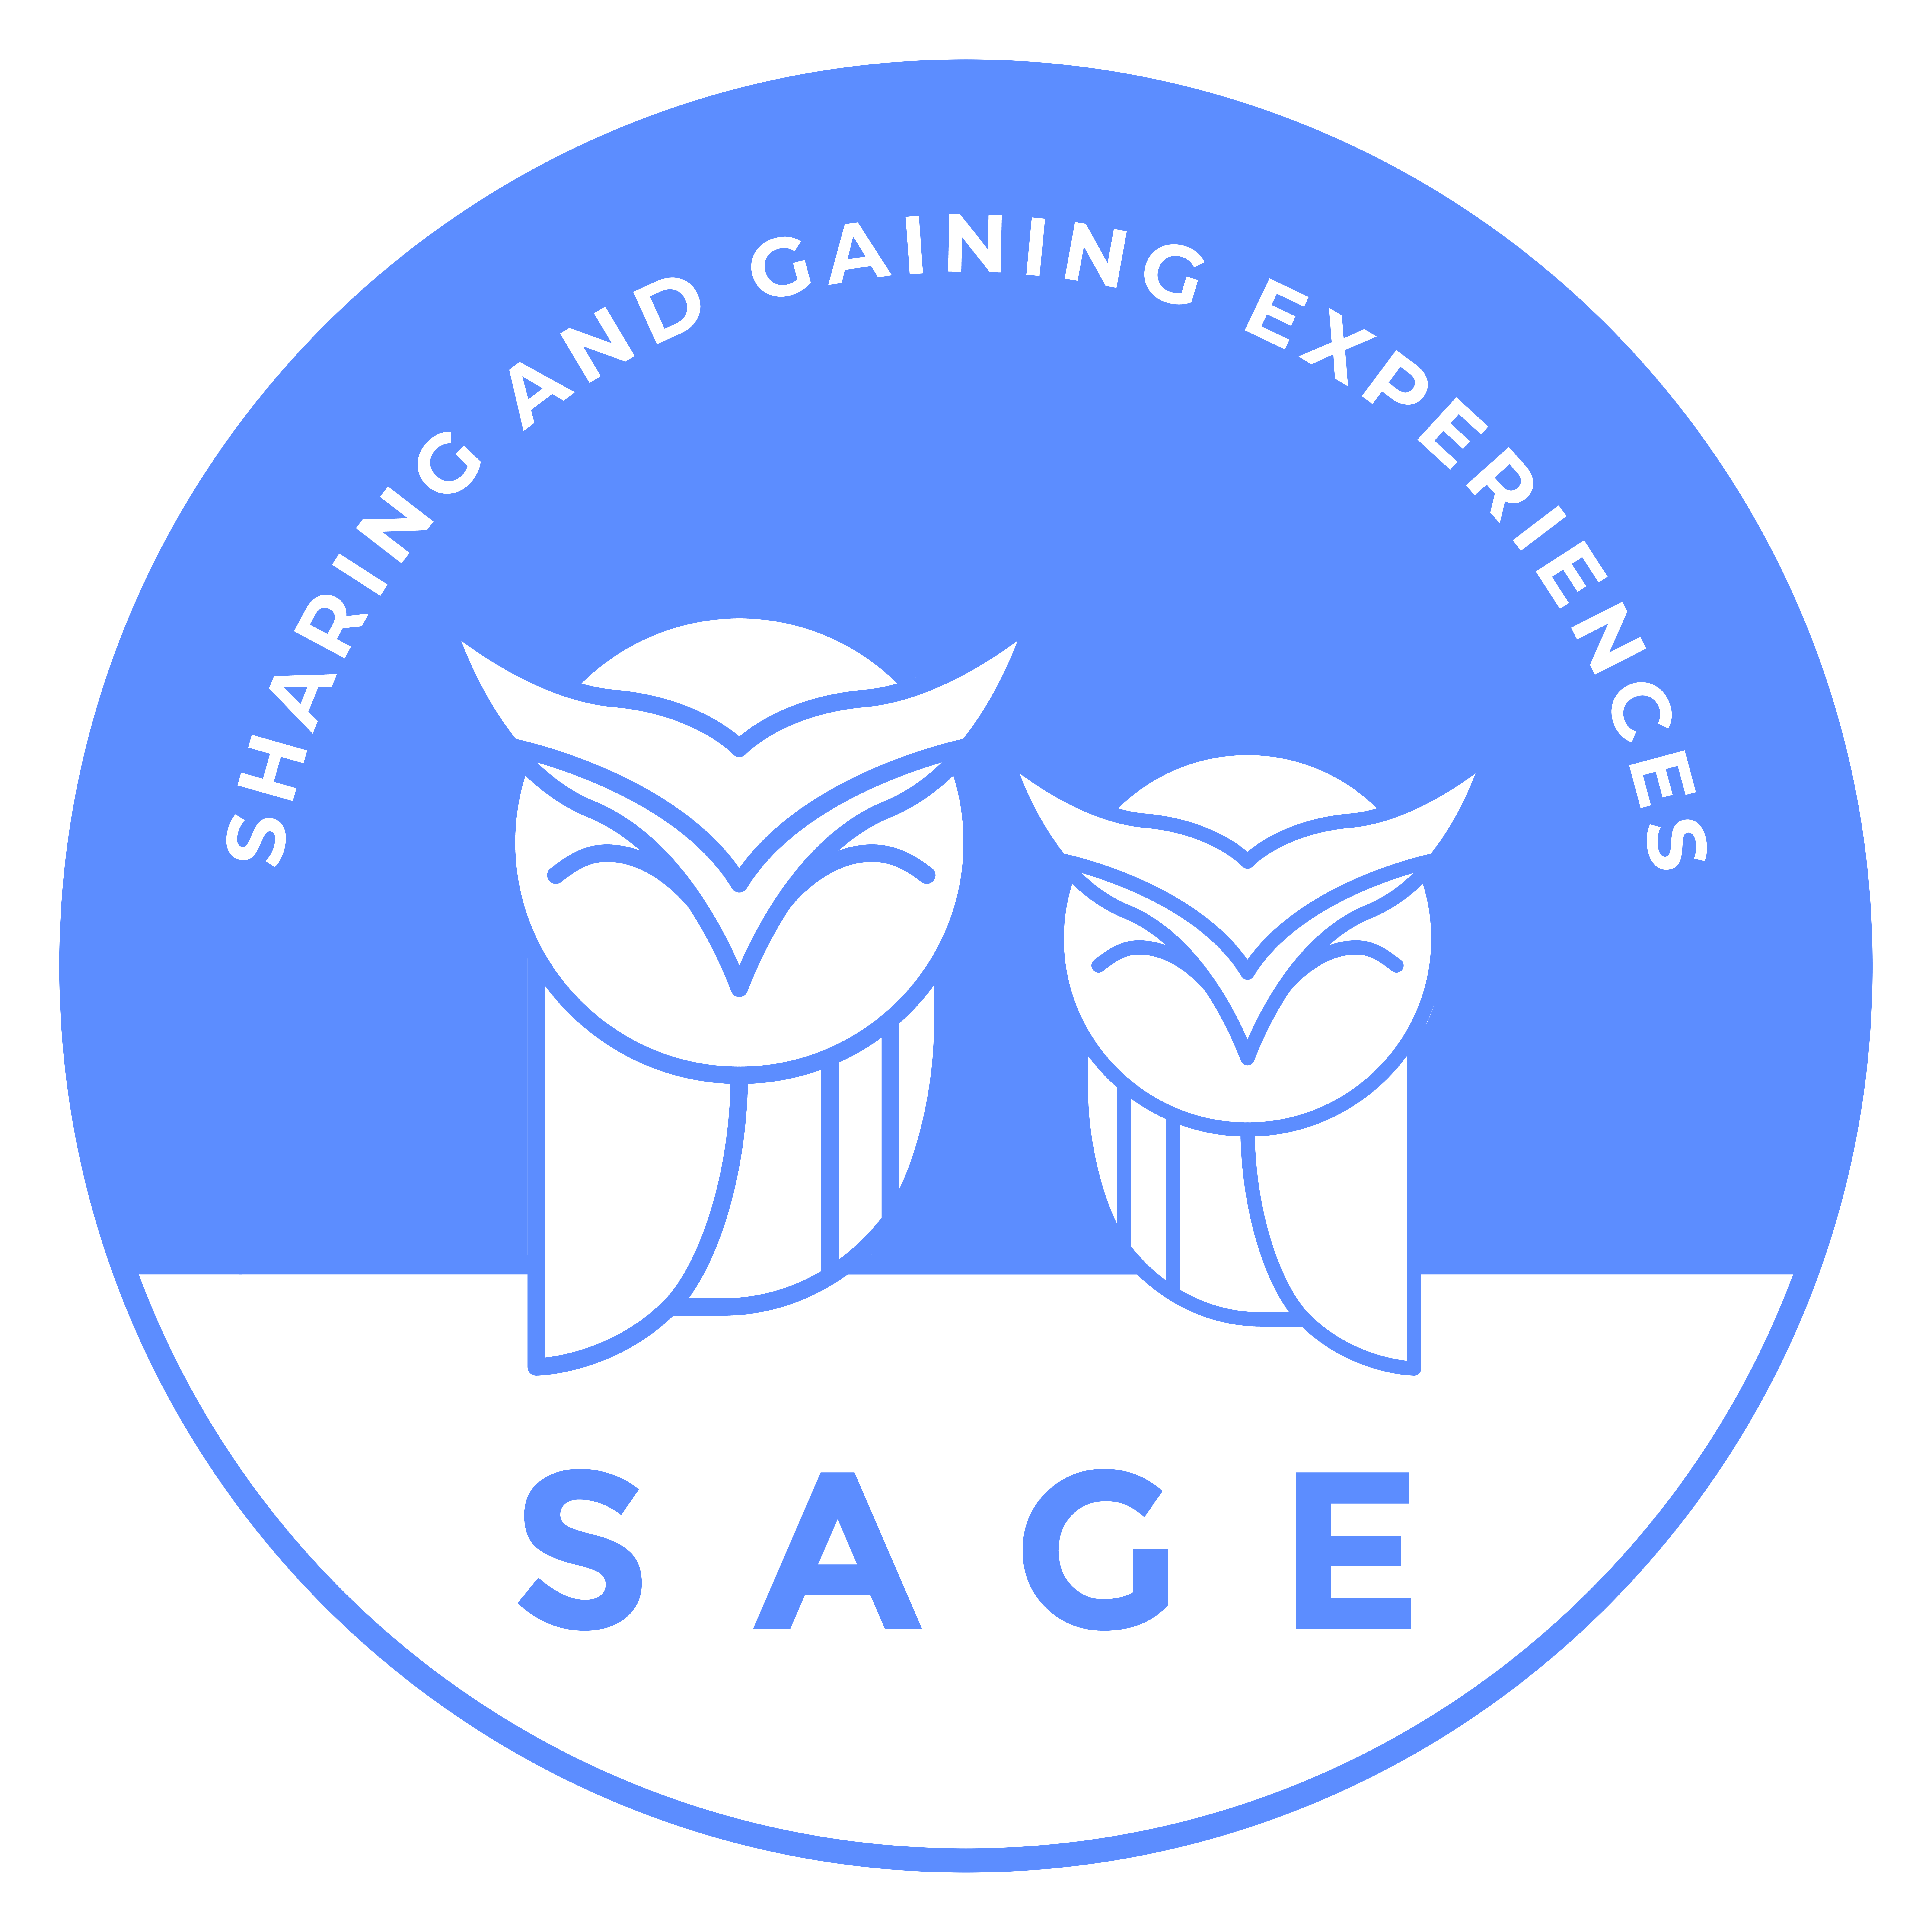 The logo for SAGE